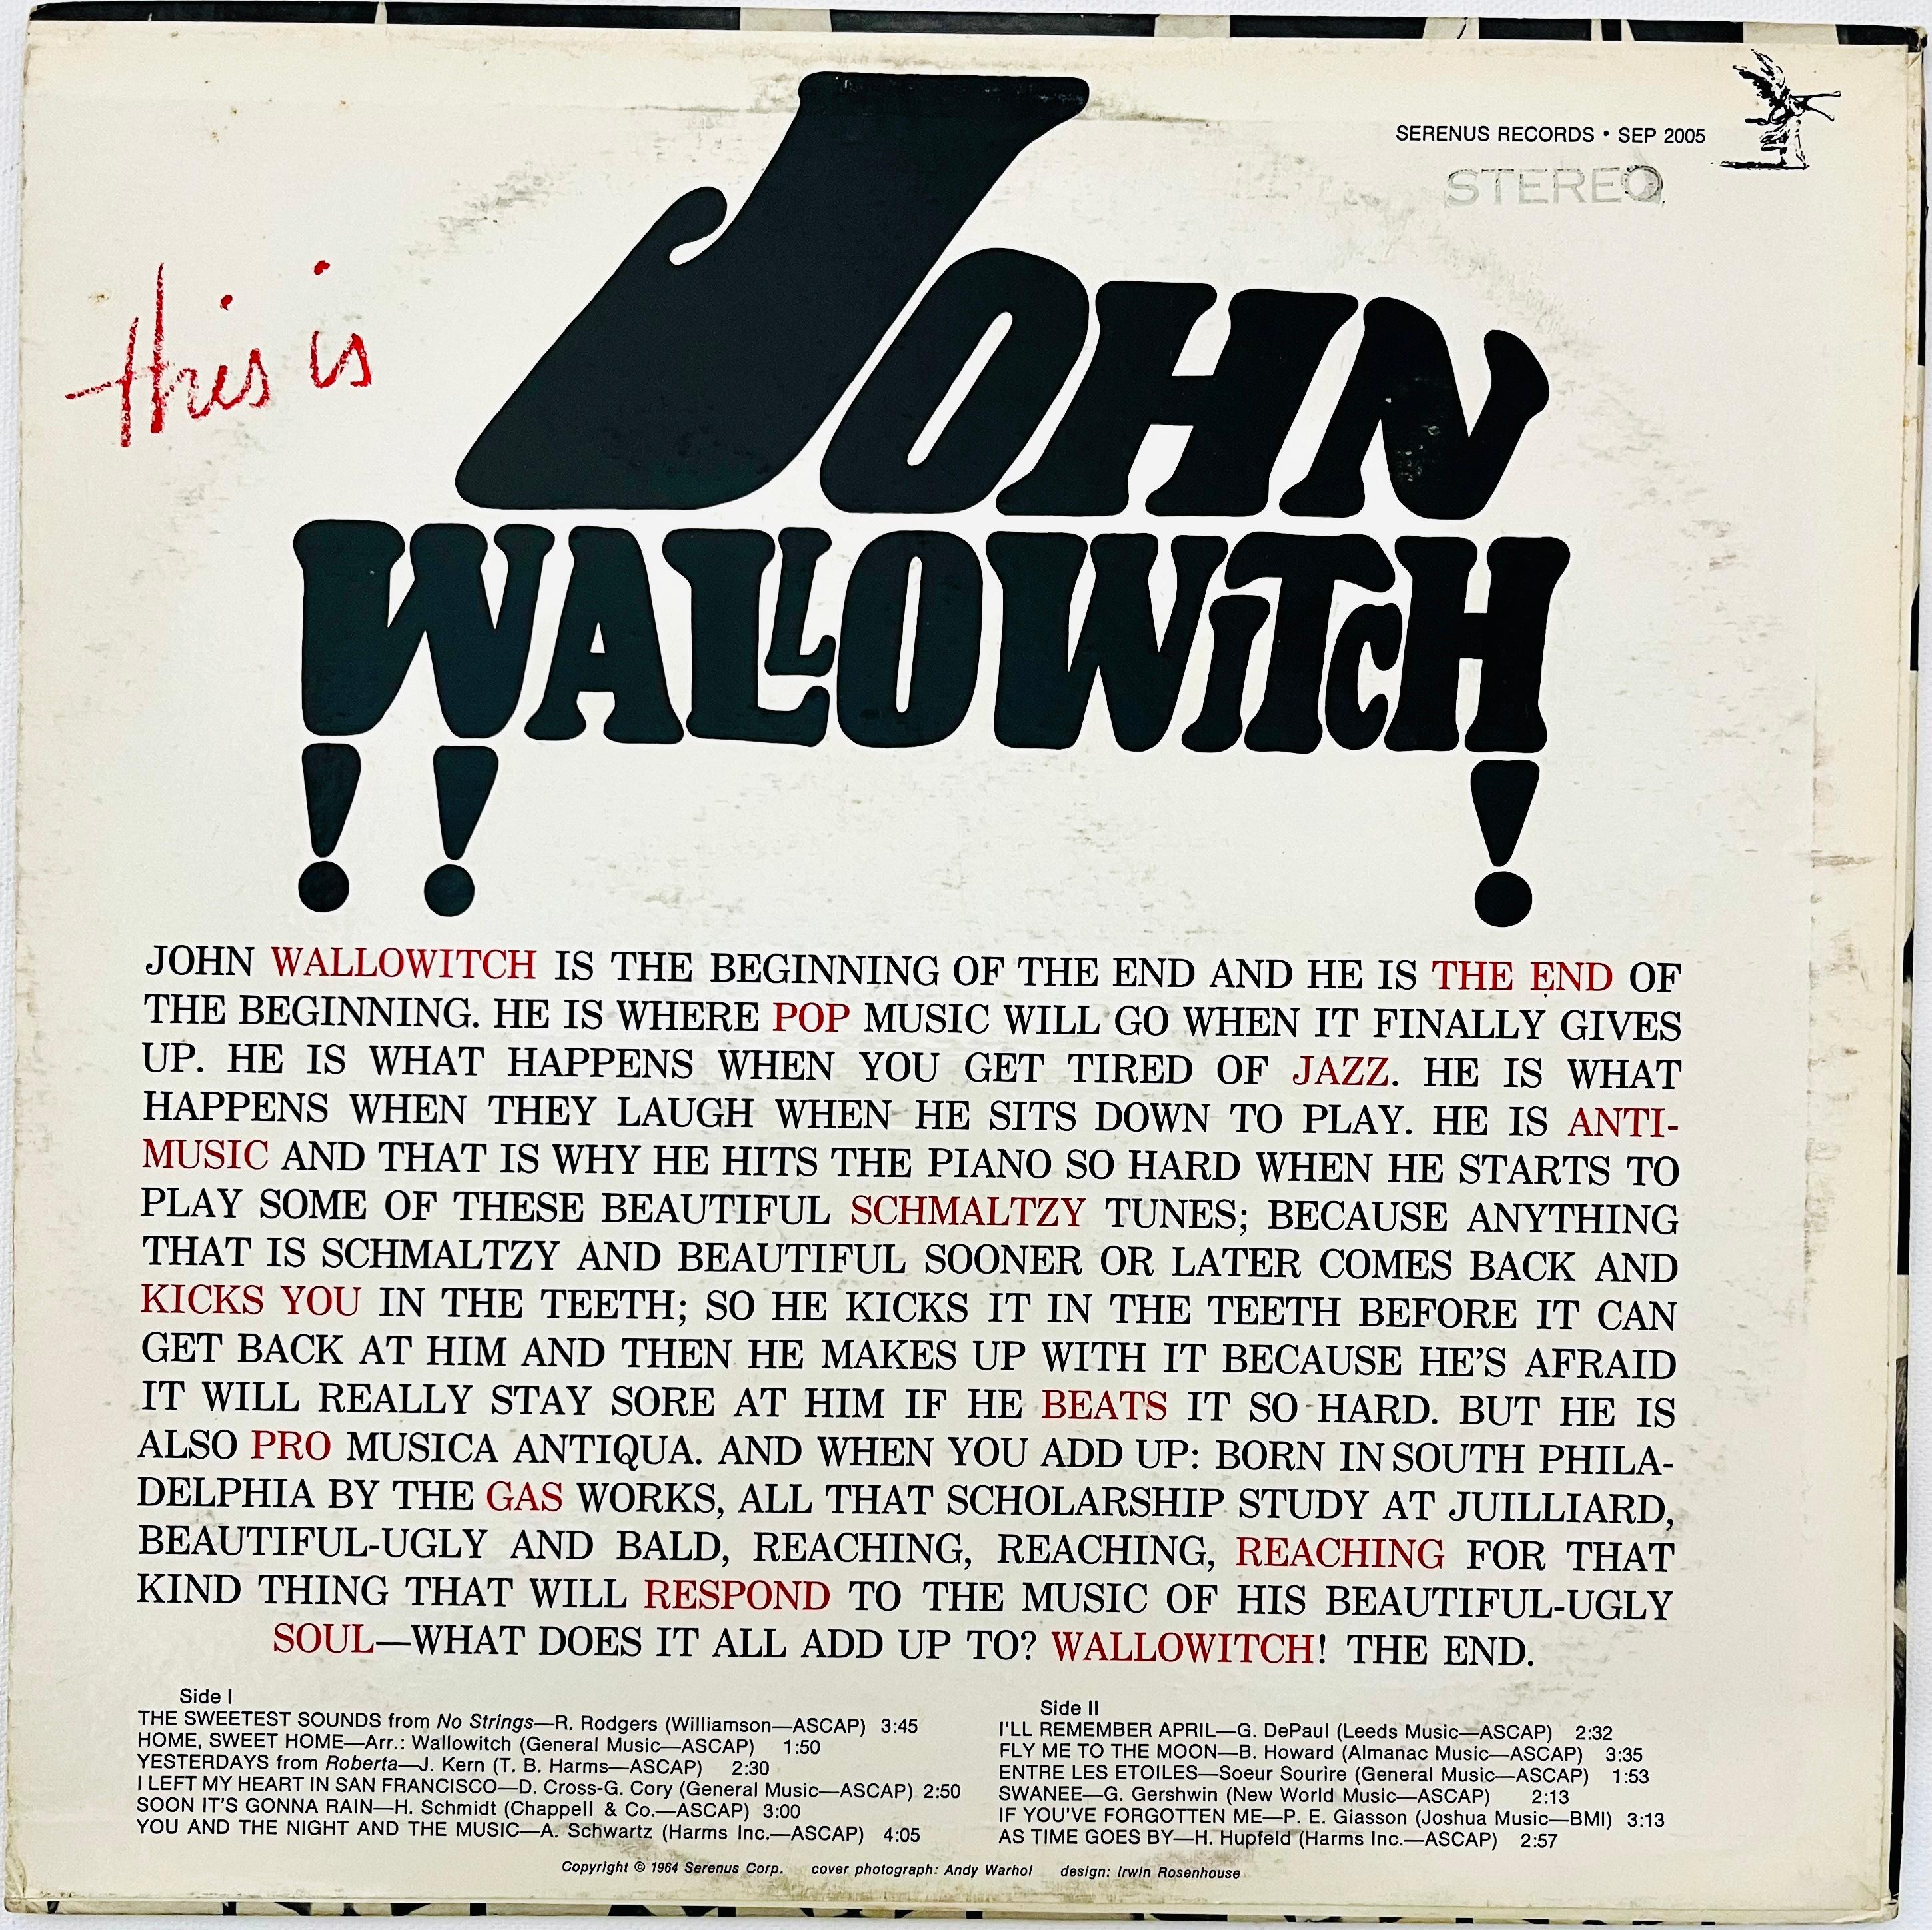 John Wallowitch 
This Is John Wallowitch, 1964
Serenus 
Vinly, LP
SEP 2005
Cover art credit: Andy Warhol

1964 1st pressing, 'This Is John Wallowitch' featuring Original Cover Art by Andy Warhol. One of the rarest of all Warhol illustrations.